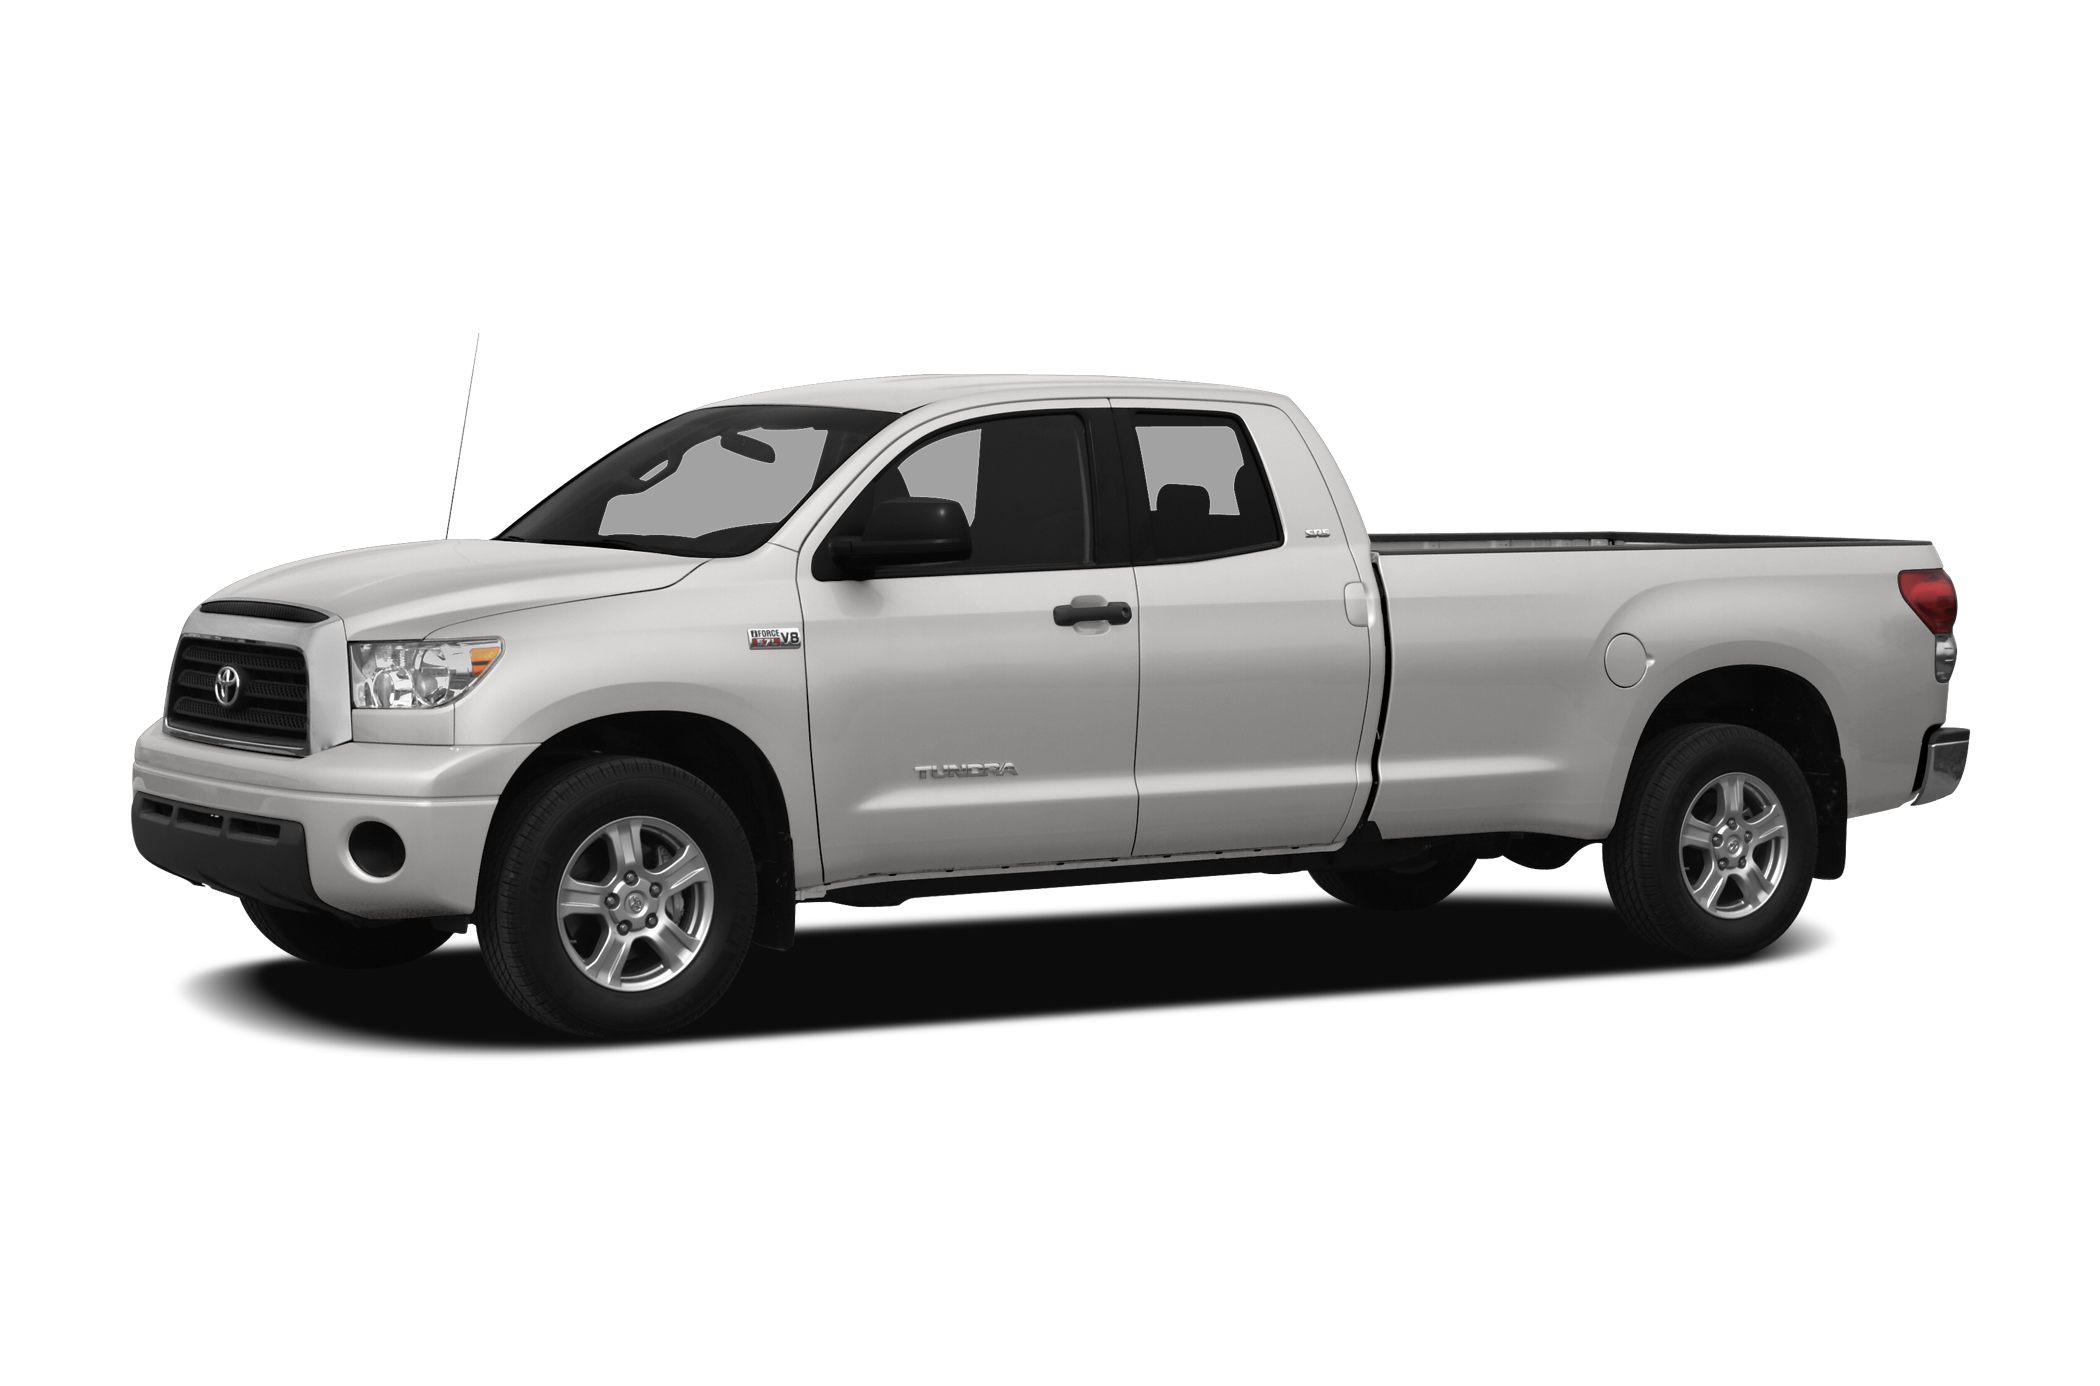 2008 Toyota Tundra Sr5 5 7l V8 4dr 4x2 Double Cab Specs And